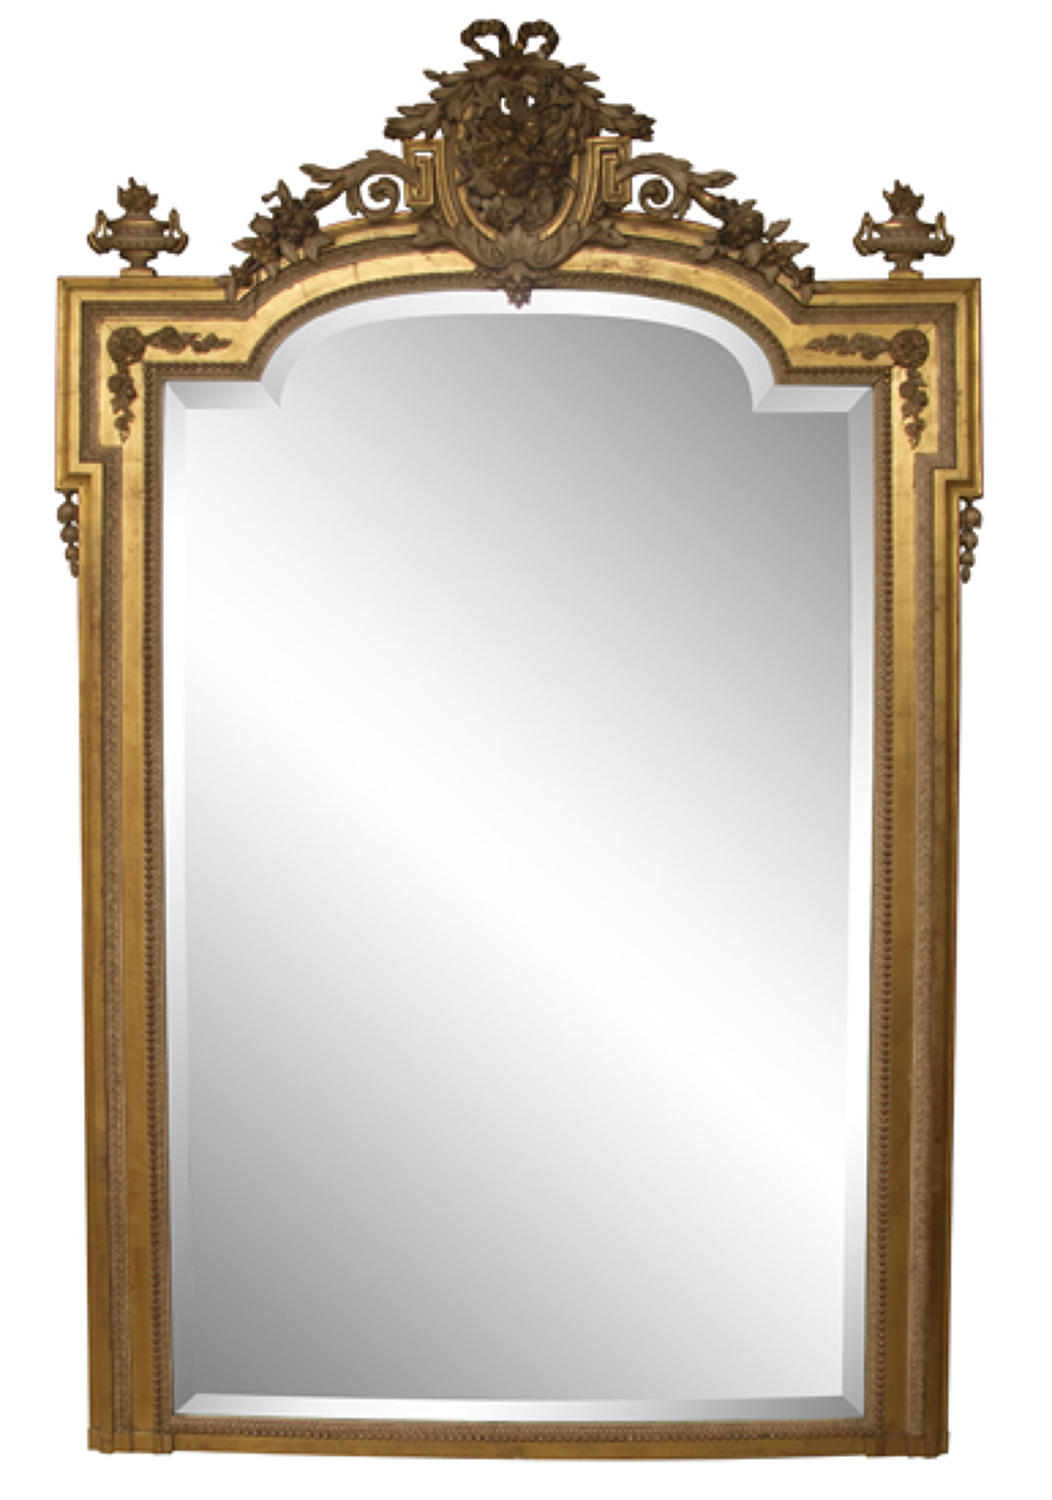 A superb Large Antique Gilded overmantle wall mirror